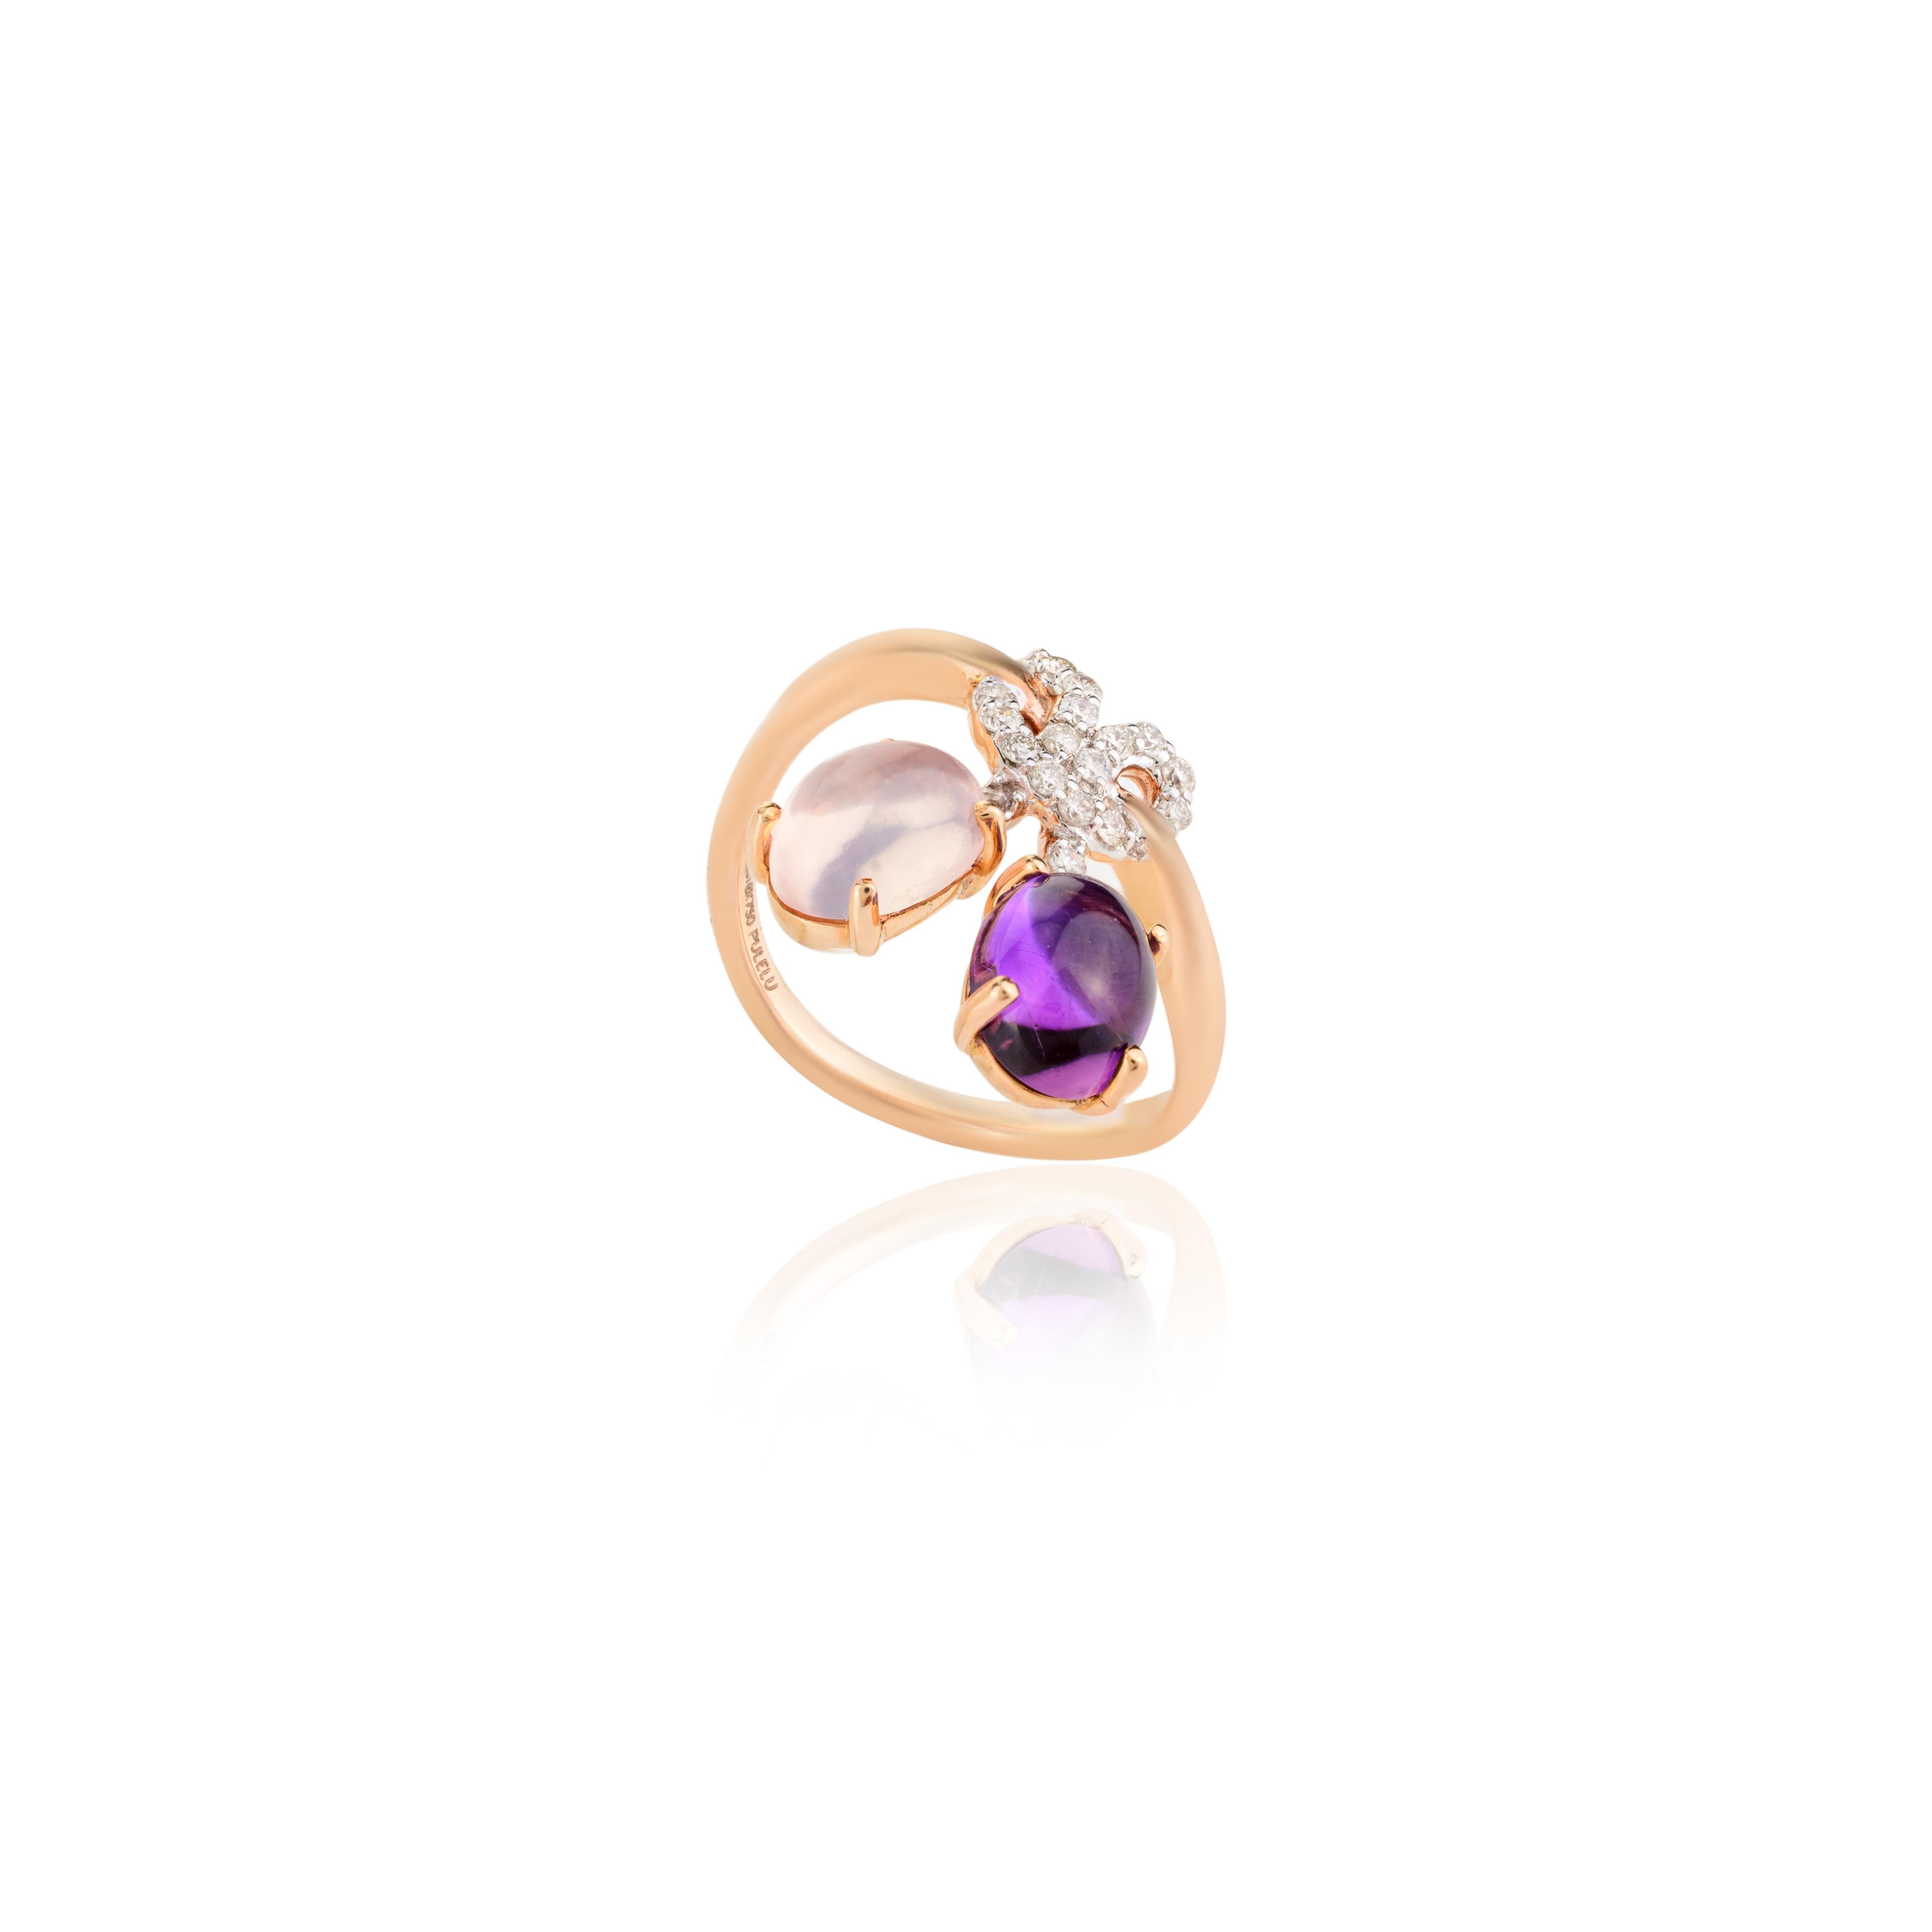 For Sale:  Statement Amethyst and Rose Quartz Ring with Diamond Bow 18k Solid Rose Gold 4